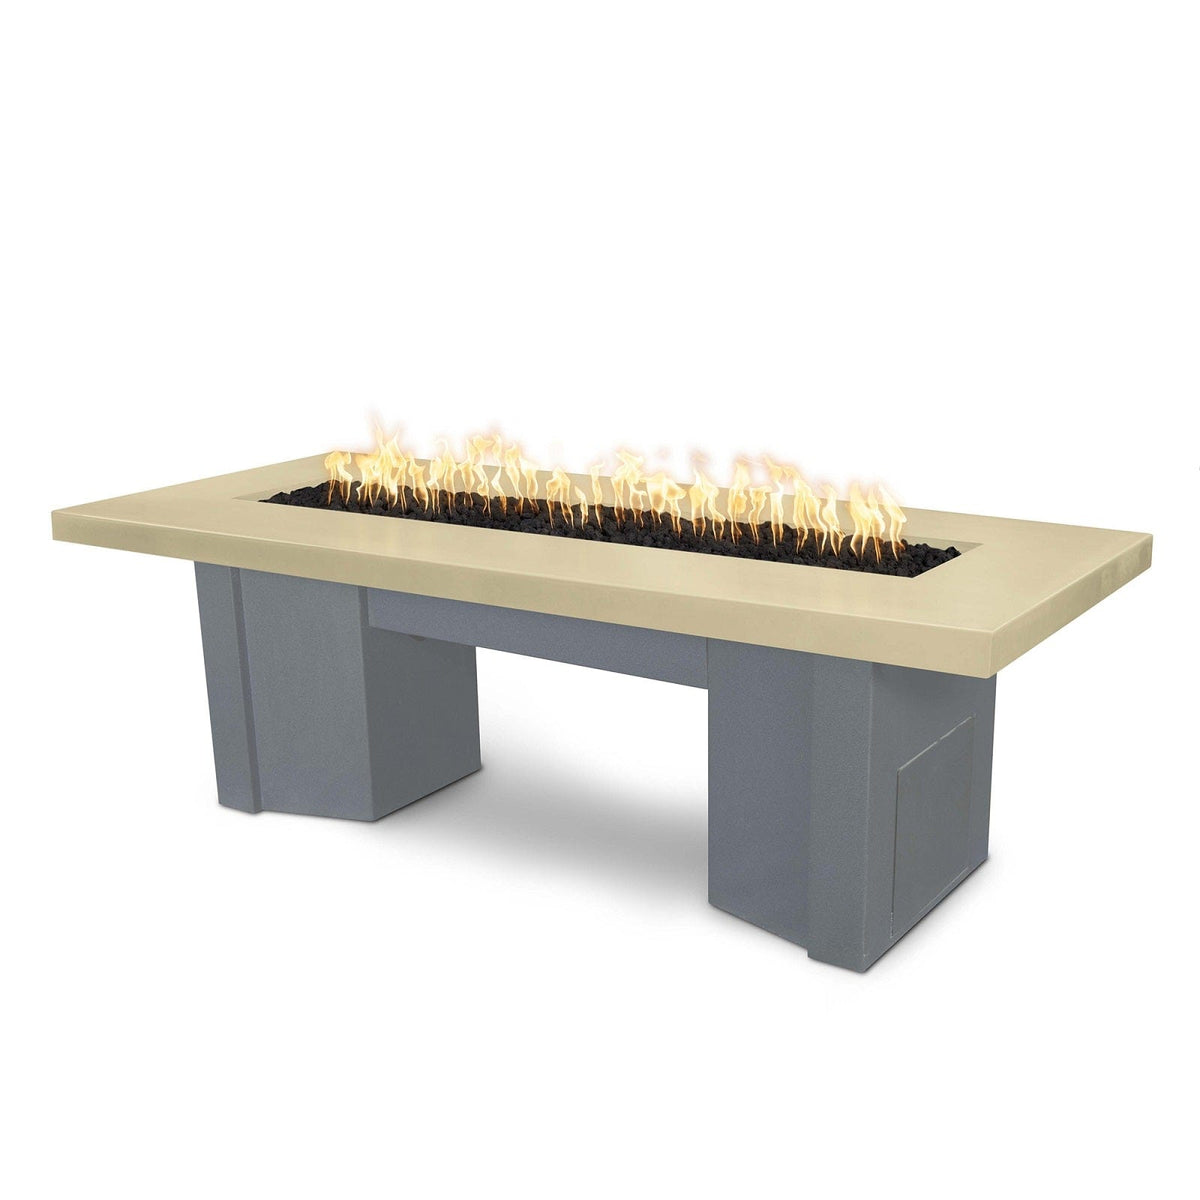 The Outdoor Plus Fire Features Vanilla (-VAN) / Gray Powder Coated Steel (-GRY) The Outdoor Plus 78&quot; Alameda Fire Table Smooth Concrete in Liquid Propane - 110V Plug &amp; Play Electronic Ignition / OPT-ALMGFRC78EKIT-LP